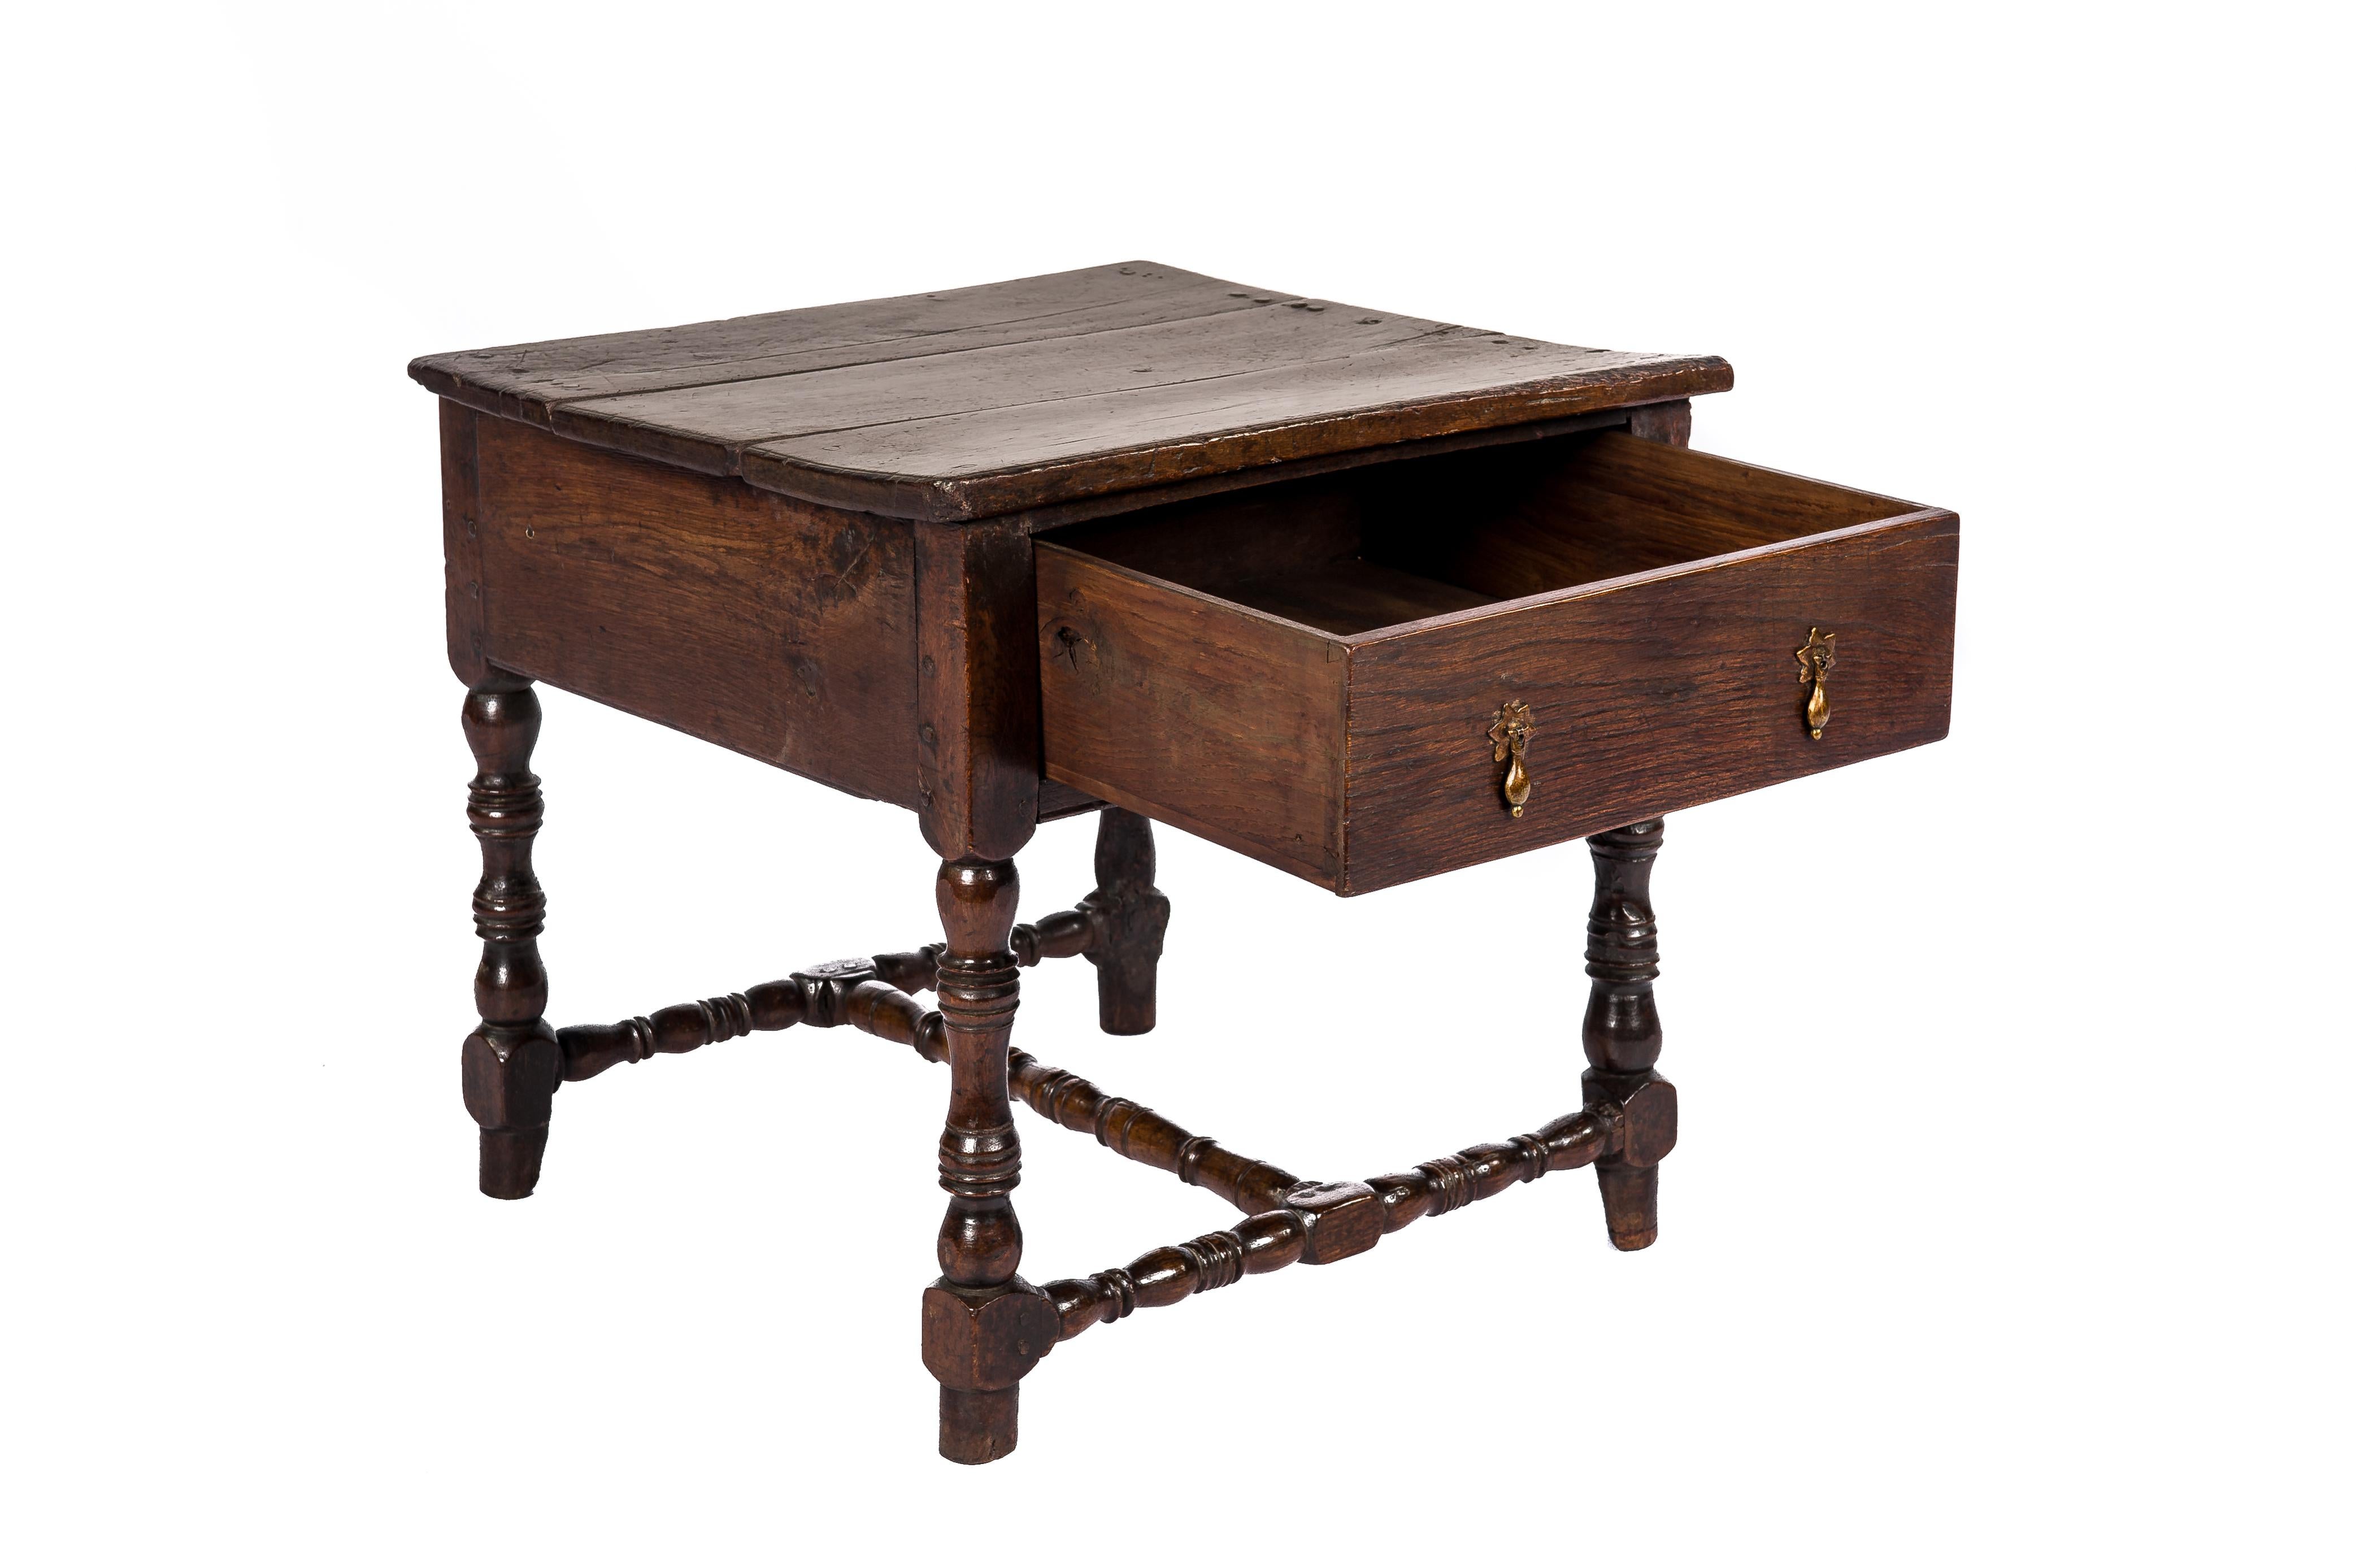 17th century side table